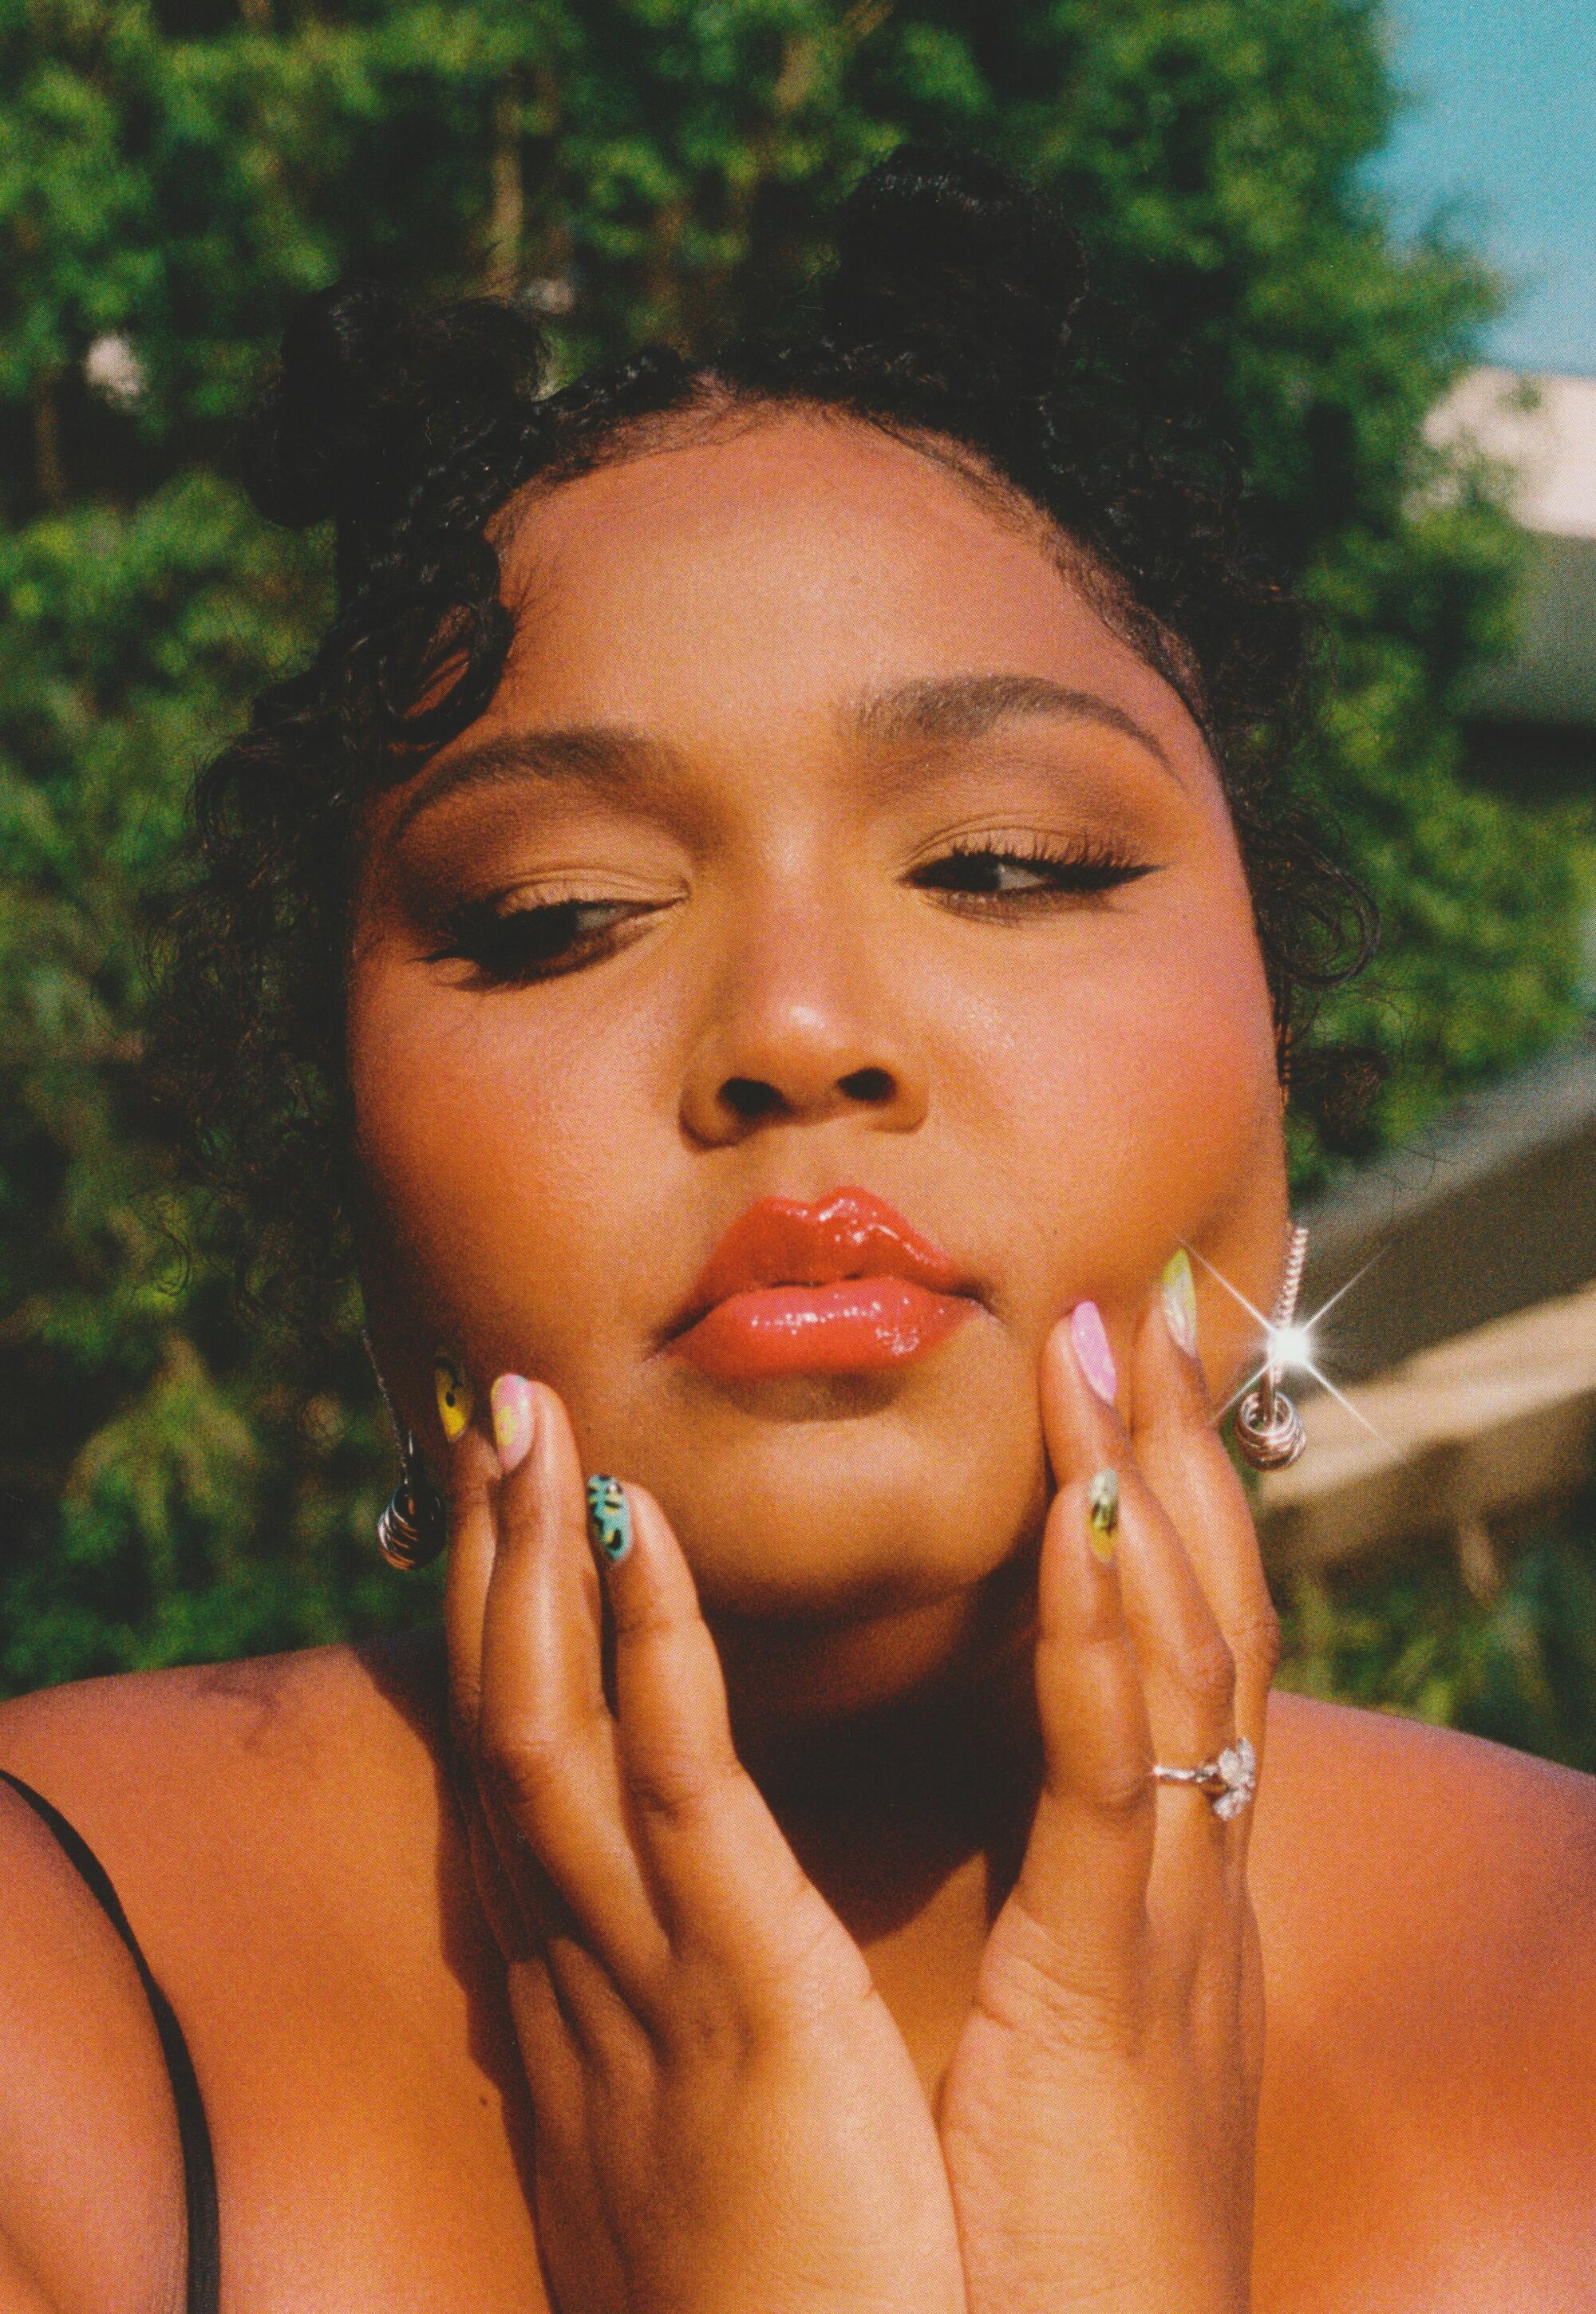 A woman with colorful nails and bright lipstick places her hands on her cheeks.